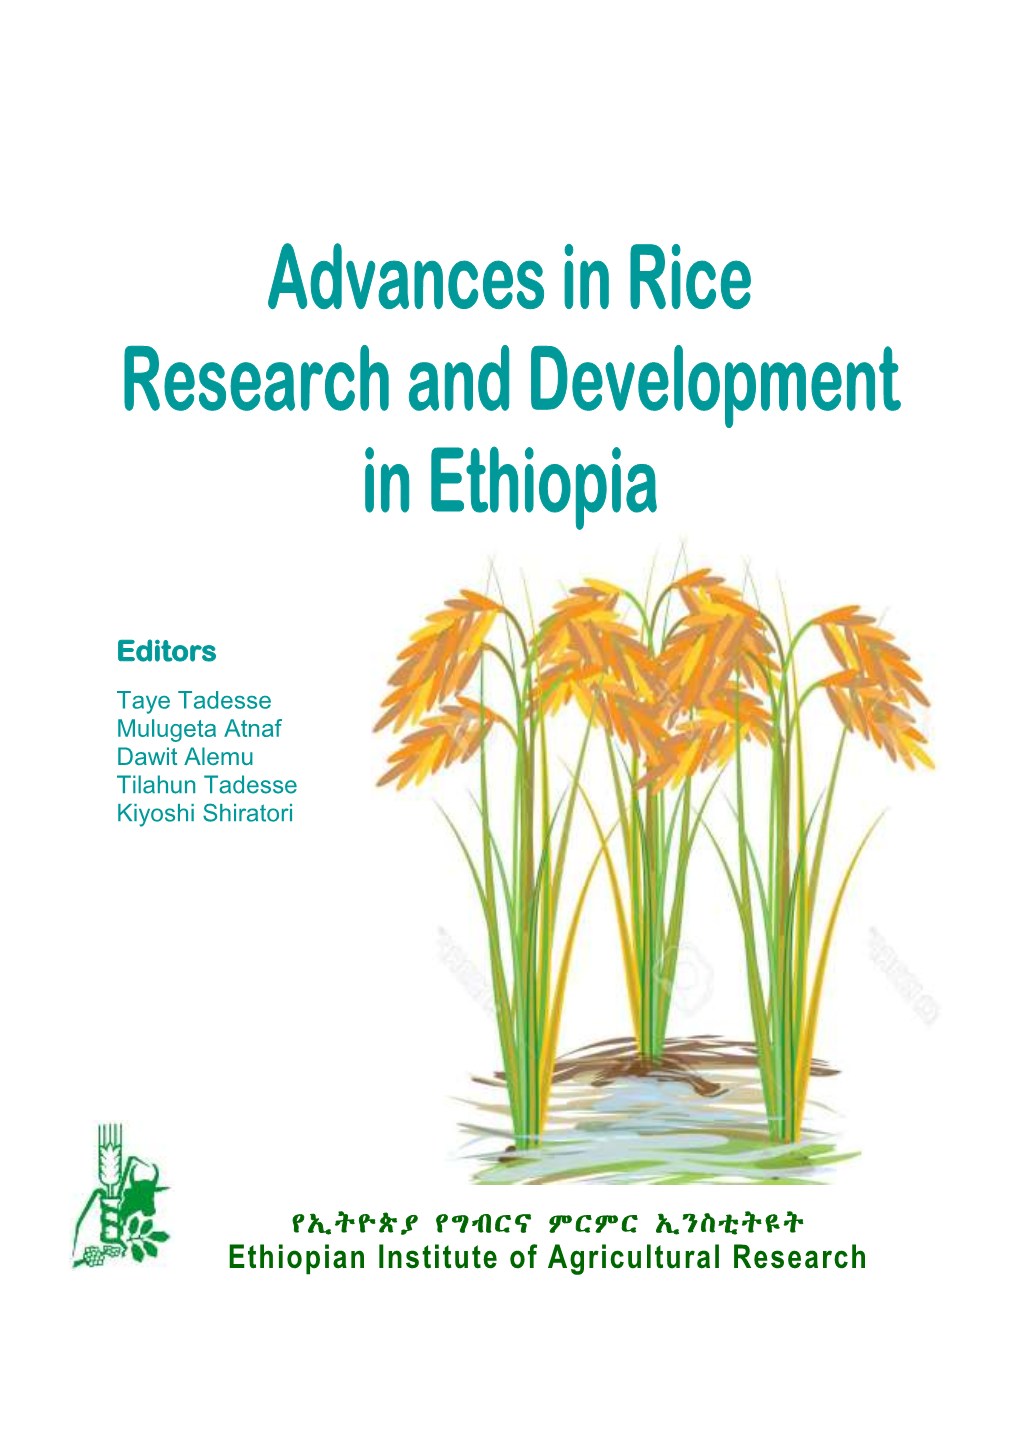 Advances in Rice Research and Development in Ethiopia